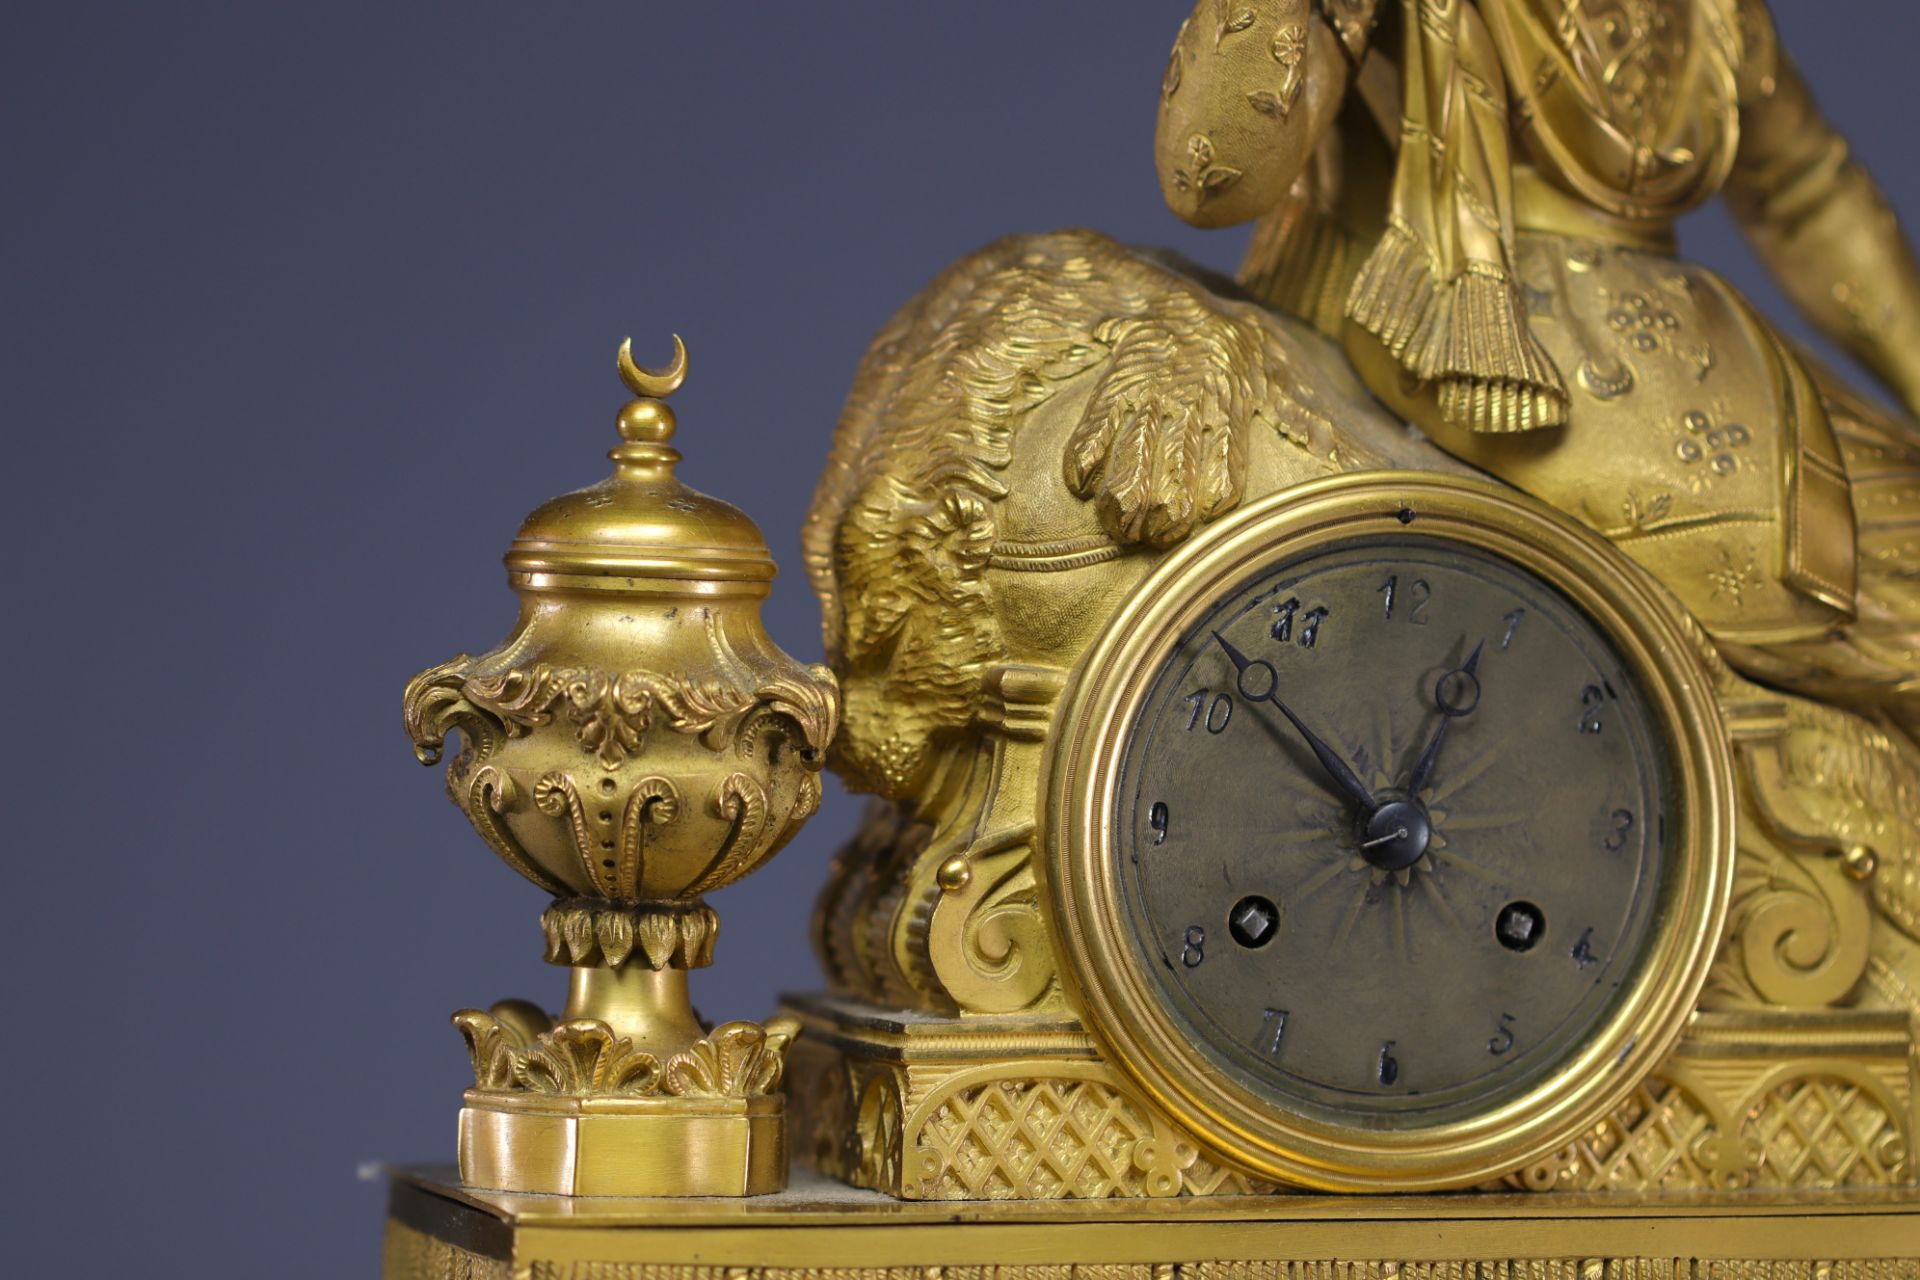 Gilt bronze clock and candelabra with Orientalist subjects, early 19th century. - Image 3 of 4